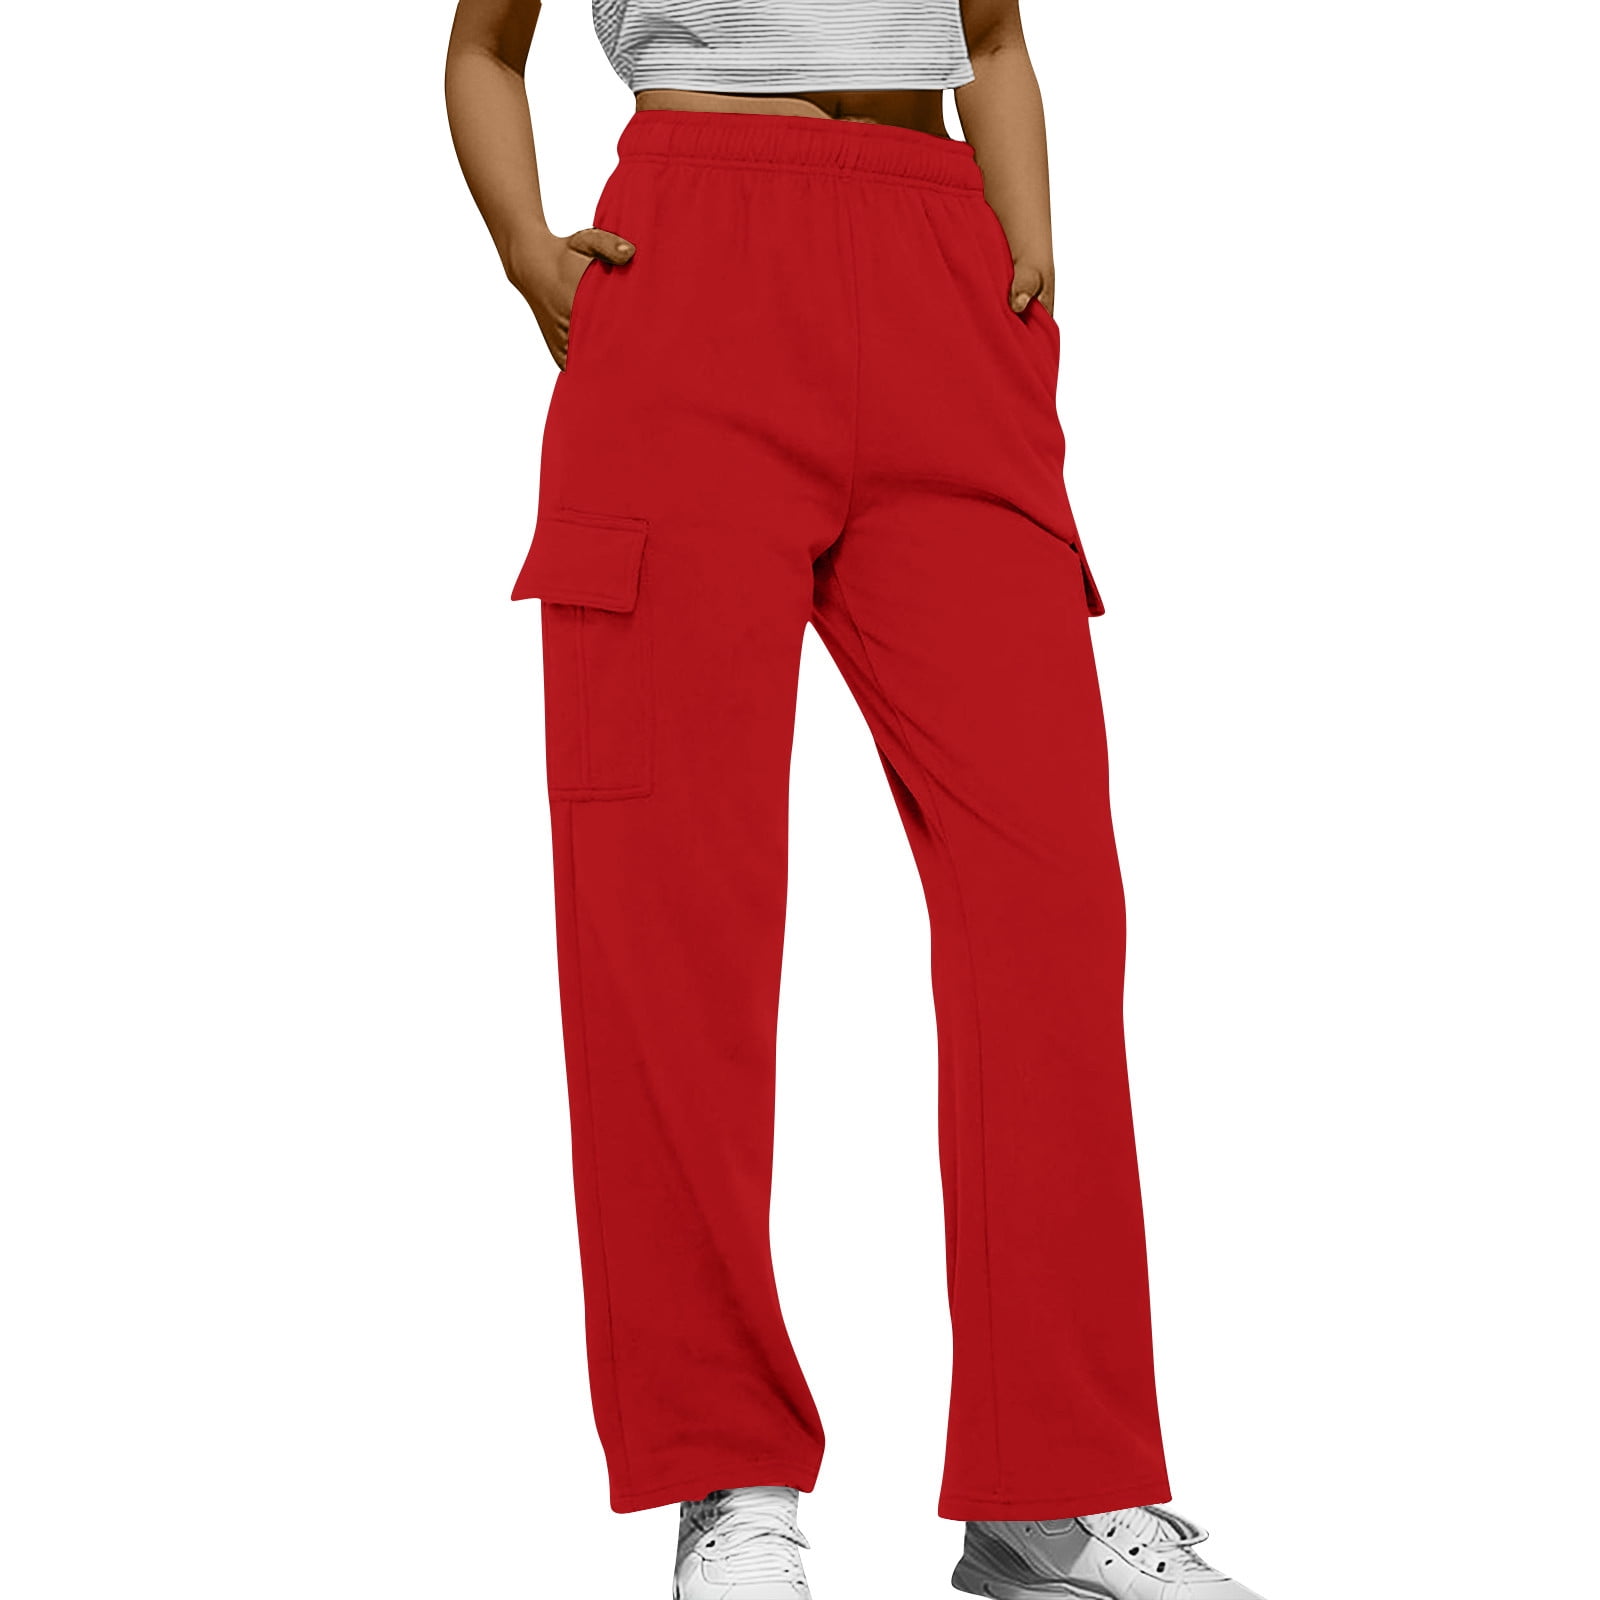 Knosfe Womens Petite Cute Sweatpants Lounge Fleece Lined Running Sweatpants  for Women with Pockets Loose Athletic Womens Jogger High Waisted Comfy  Straight Leg Fashion Baggy Pants Women Red 2XL 